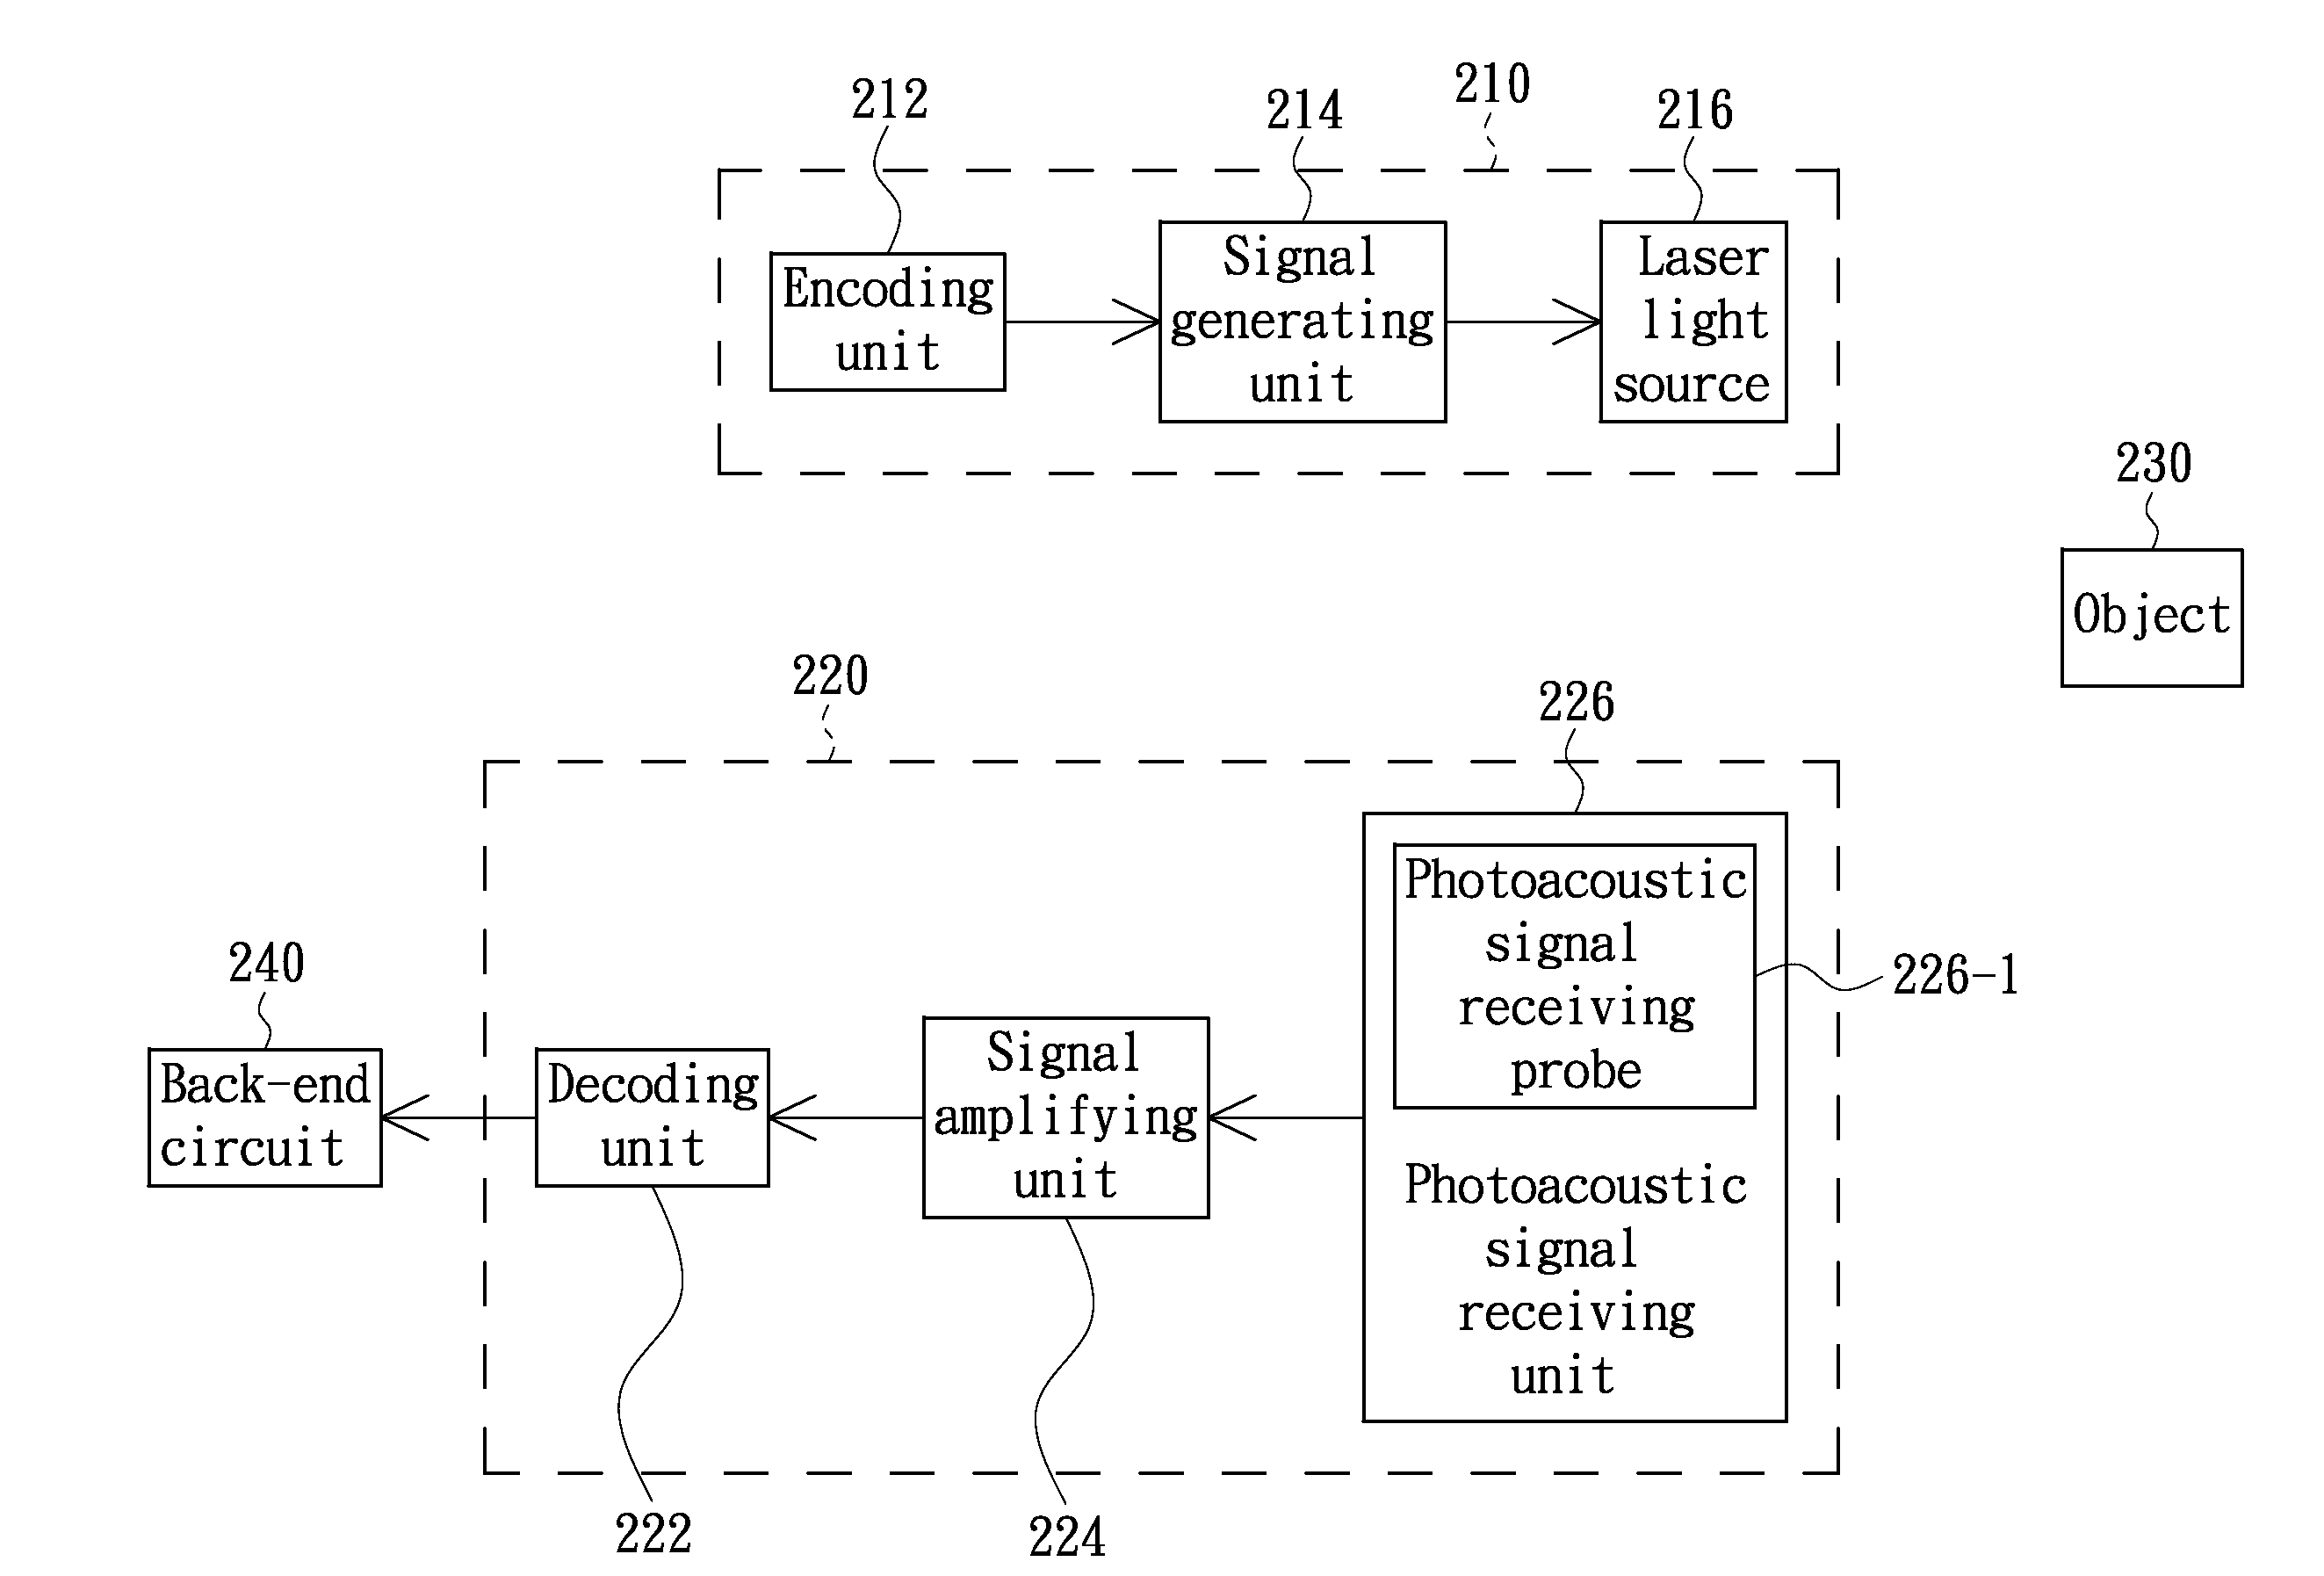 Photoacoustic imaging system, coded laser emitting apparatus and photoacoustic signal receiving apparatus